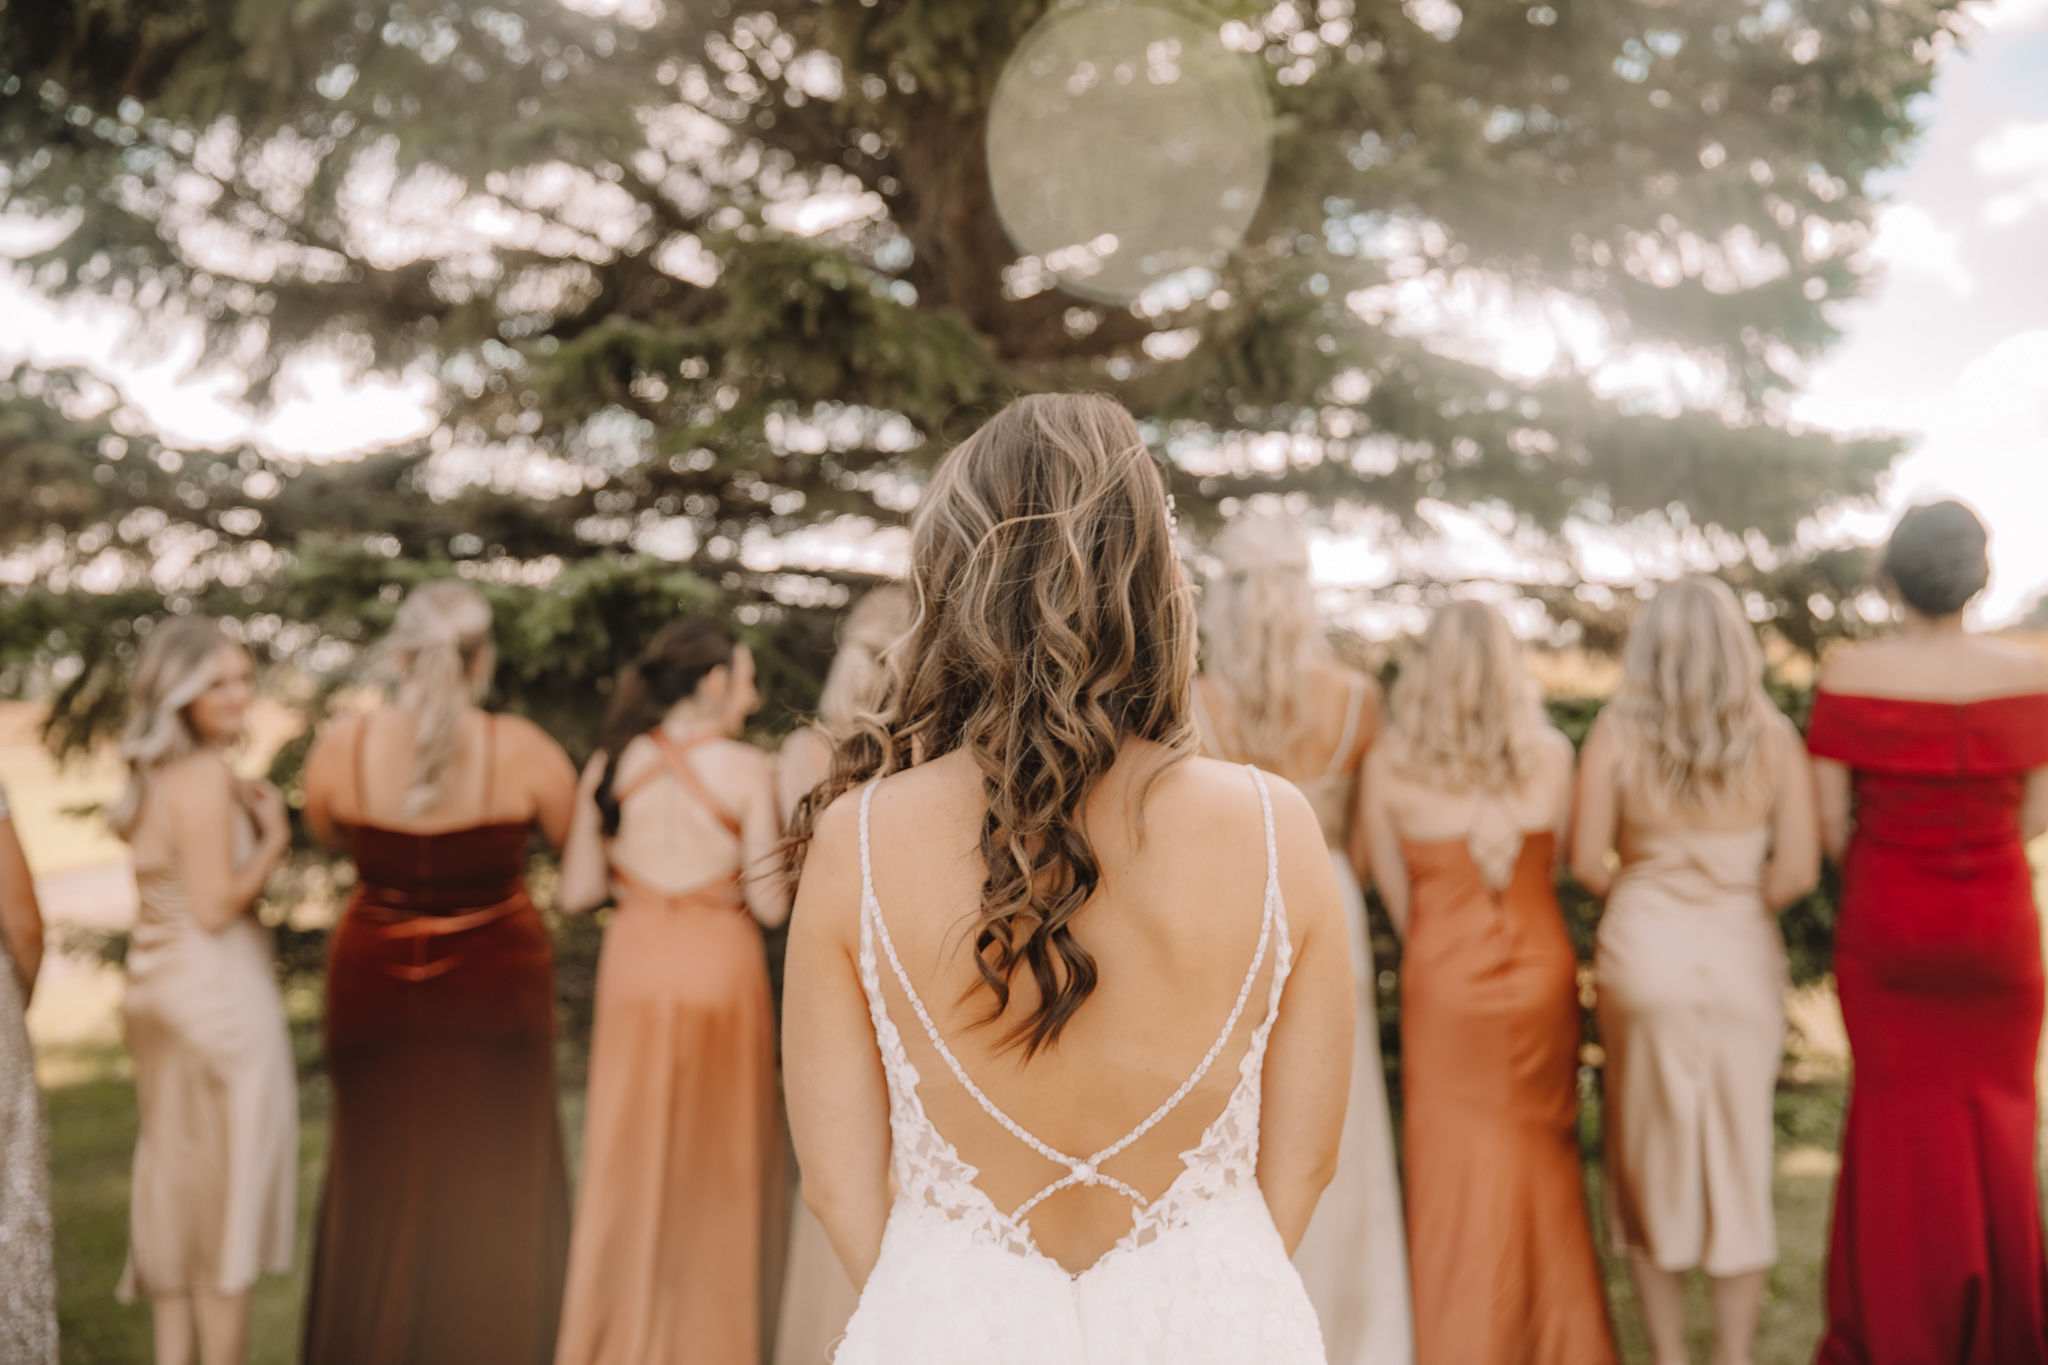 North Dakota Bride getting ready for her reveal to her bridesmaids in their fall colored dresses